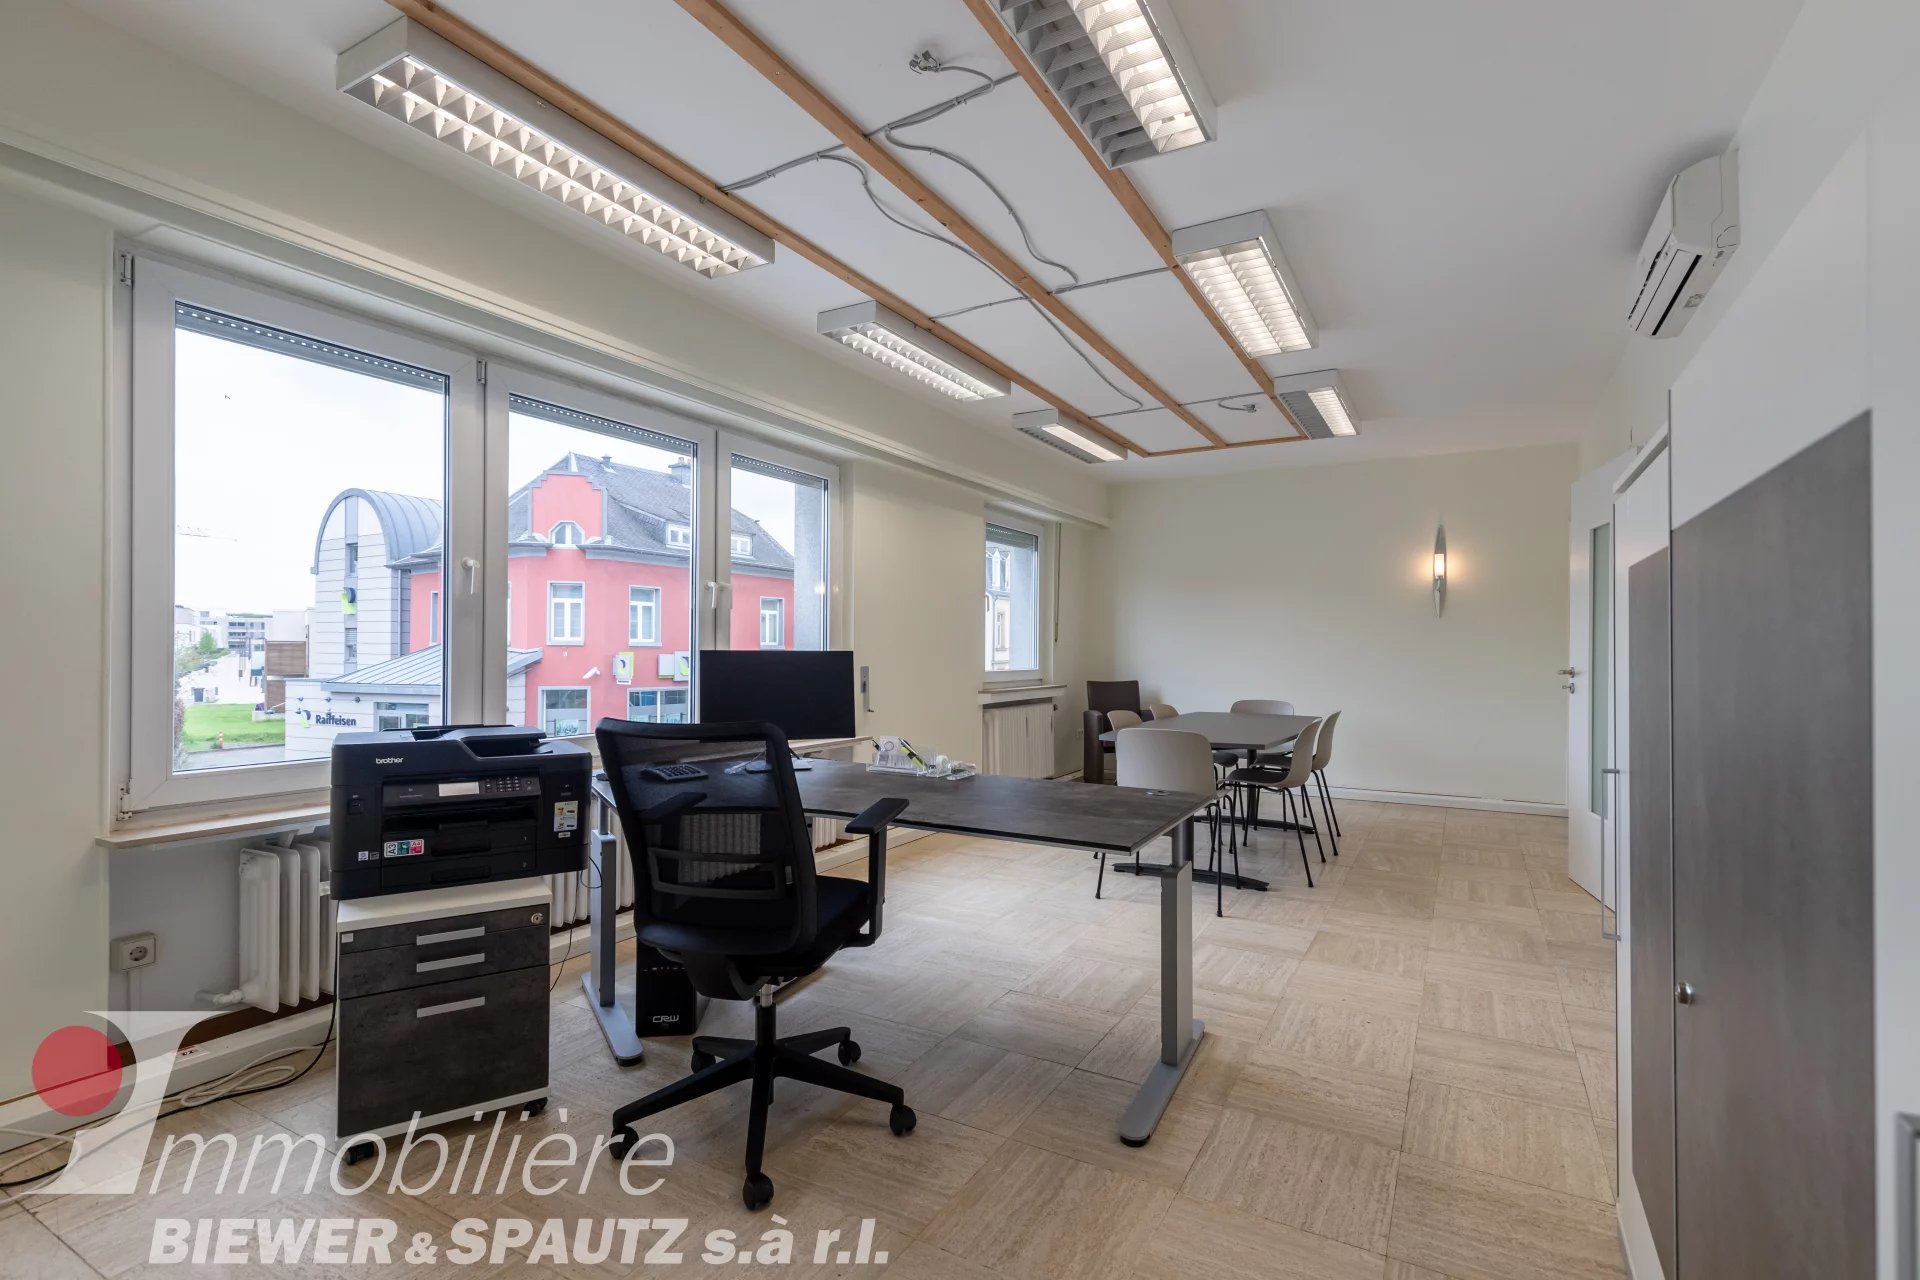 FOR RENT - bright, furnished office space in Junglinster